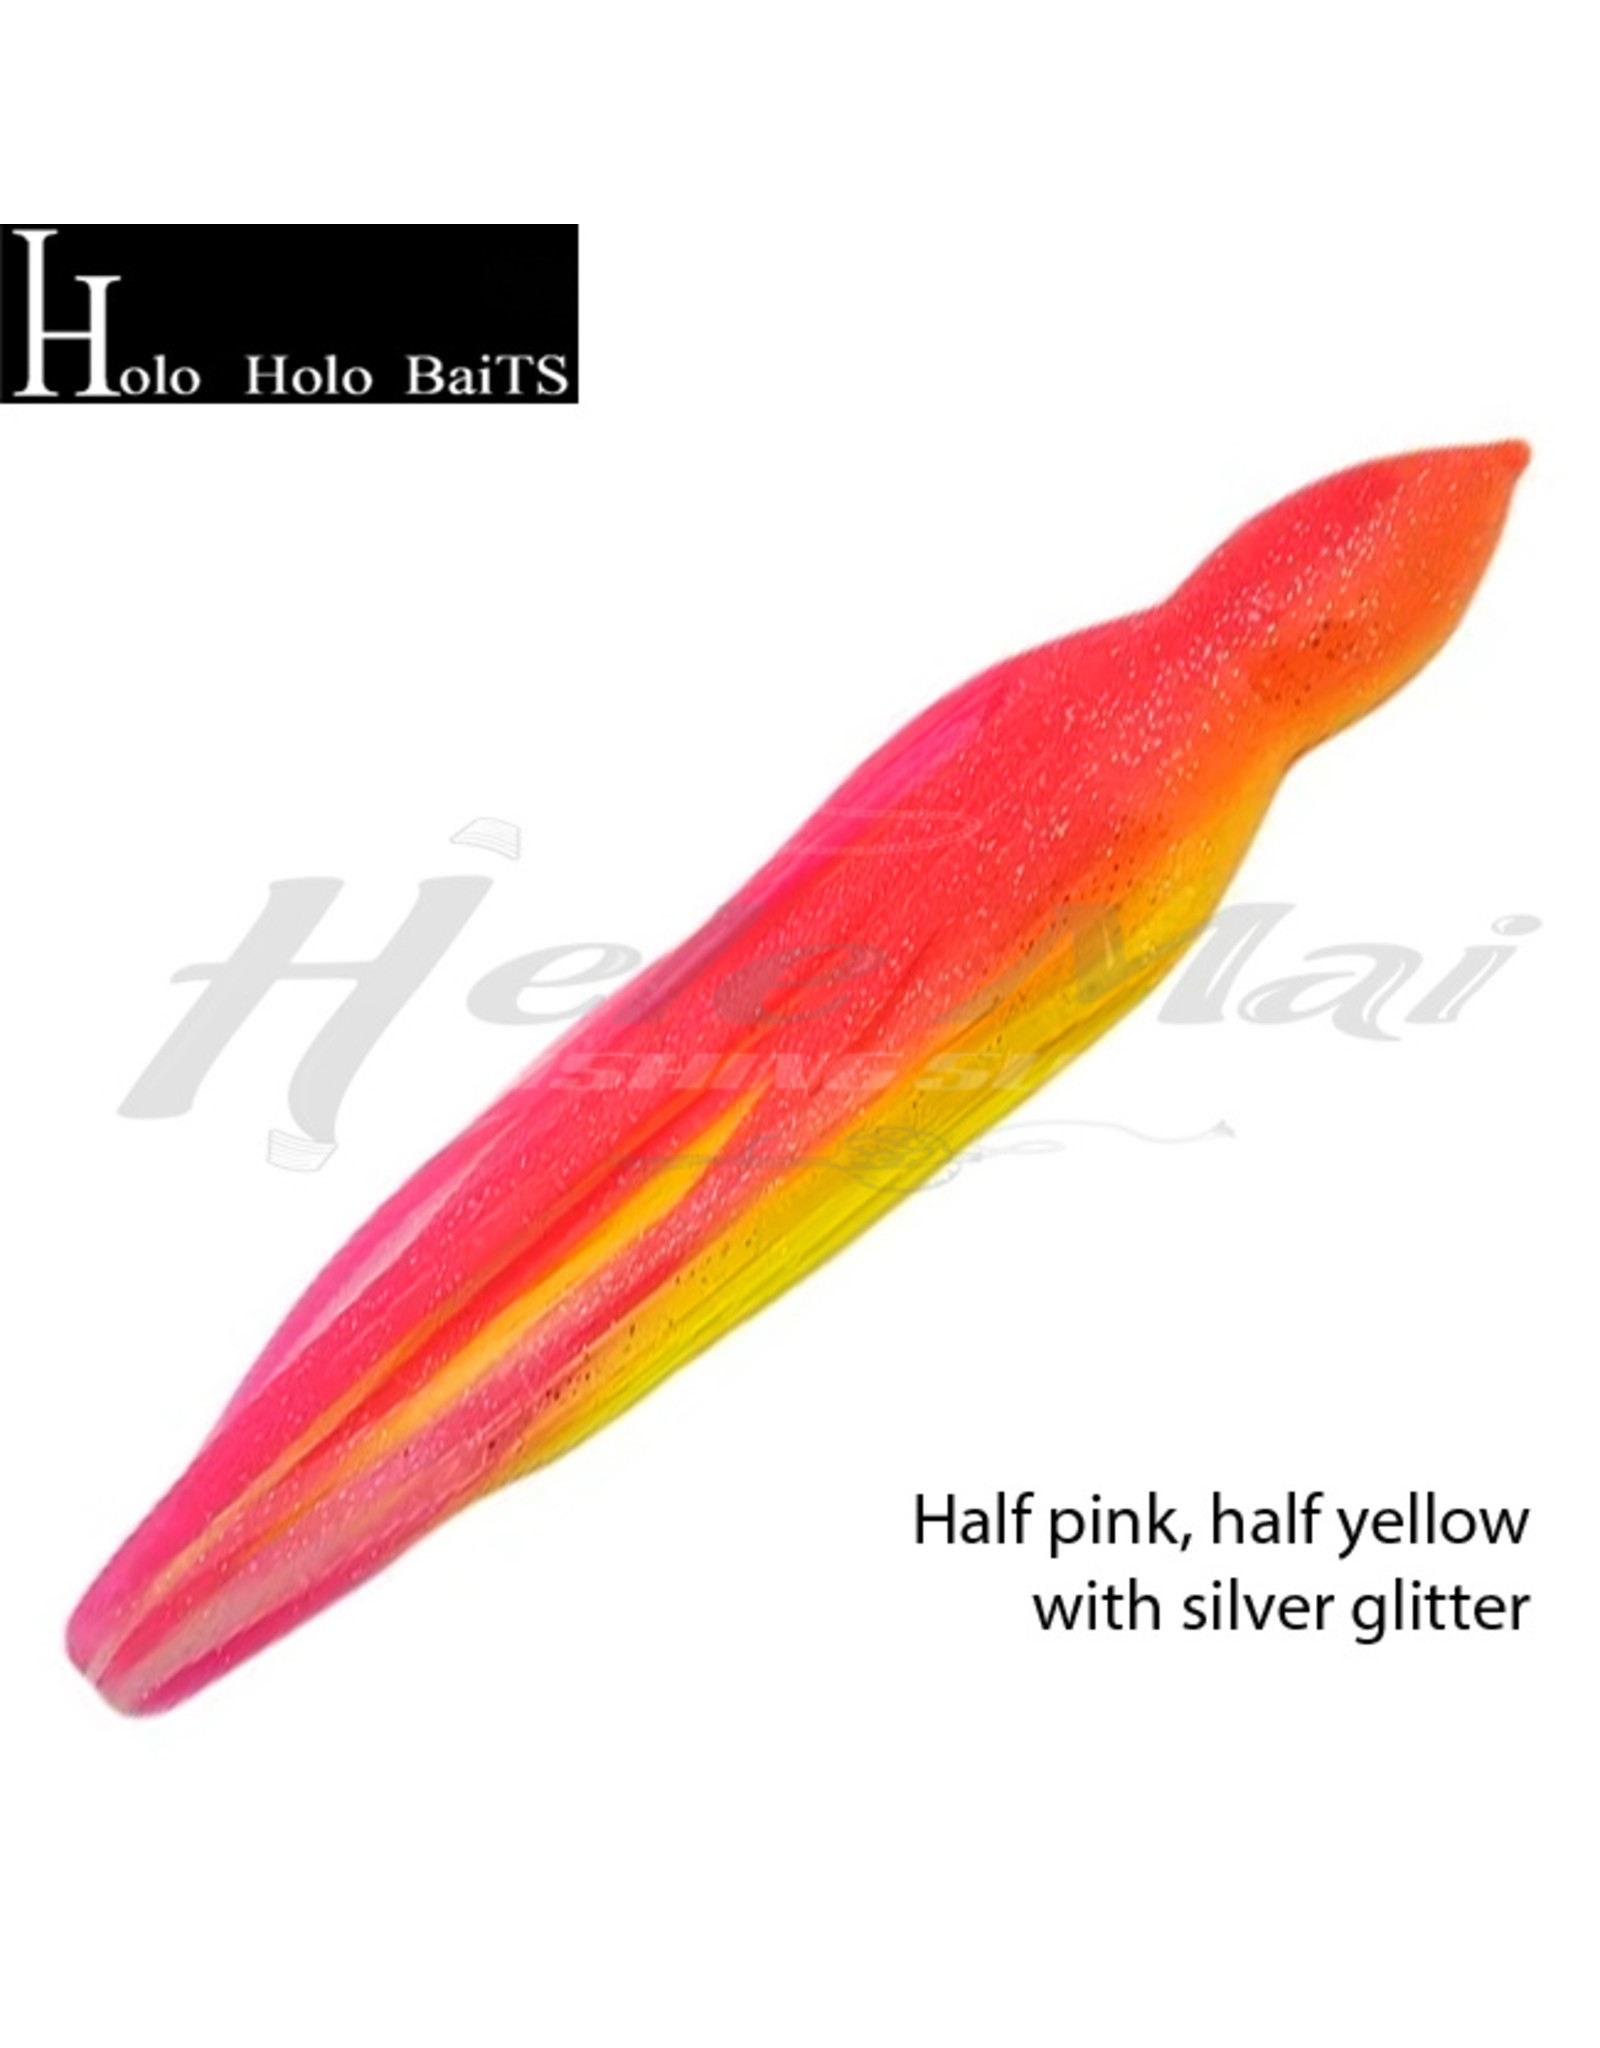 HOLO HOLO (HH) HH, 9" SQUID SKIRT SUNRISE PINK YELLOW 1105